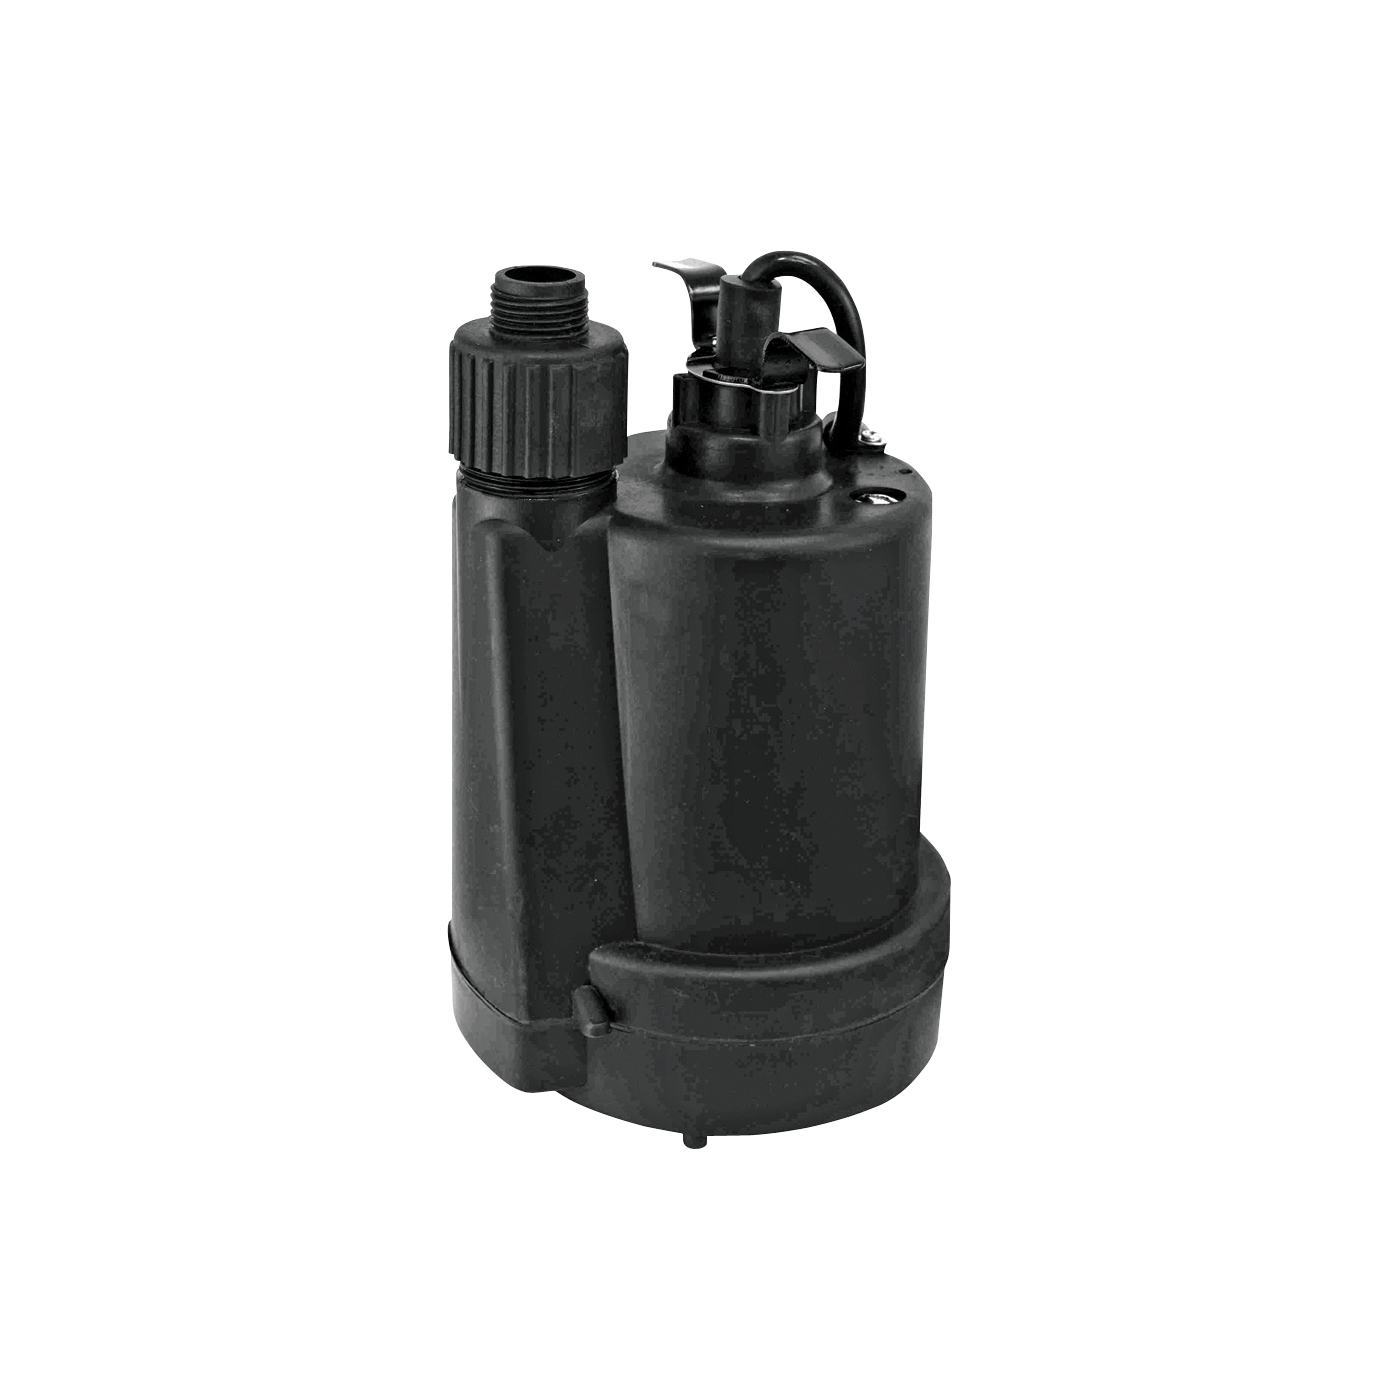 91250 Submersible Utility Pump, 3.8 A, 120 V, 0.25 hp, 1-1/4 in Outlet, 30 gpm, Thermoplastic Impeller